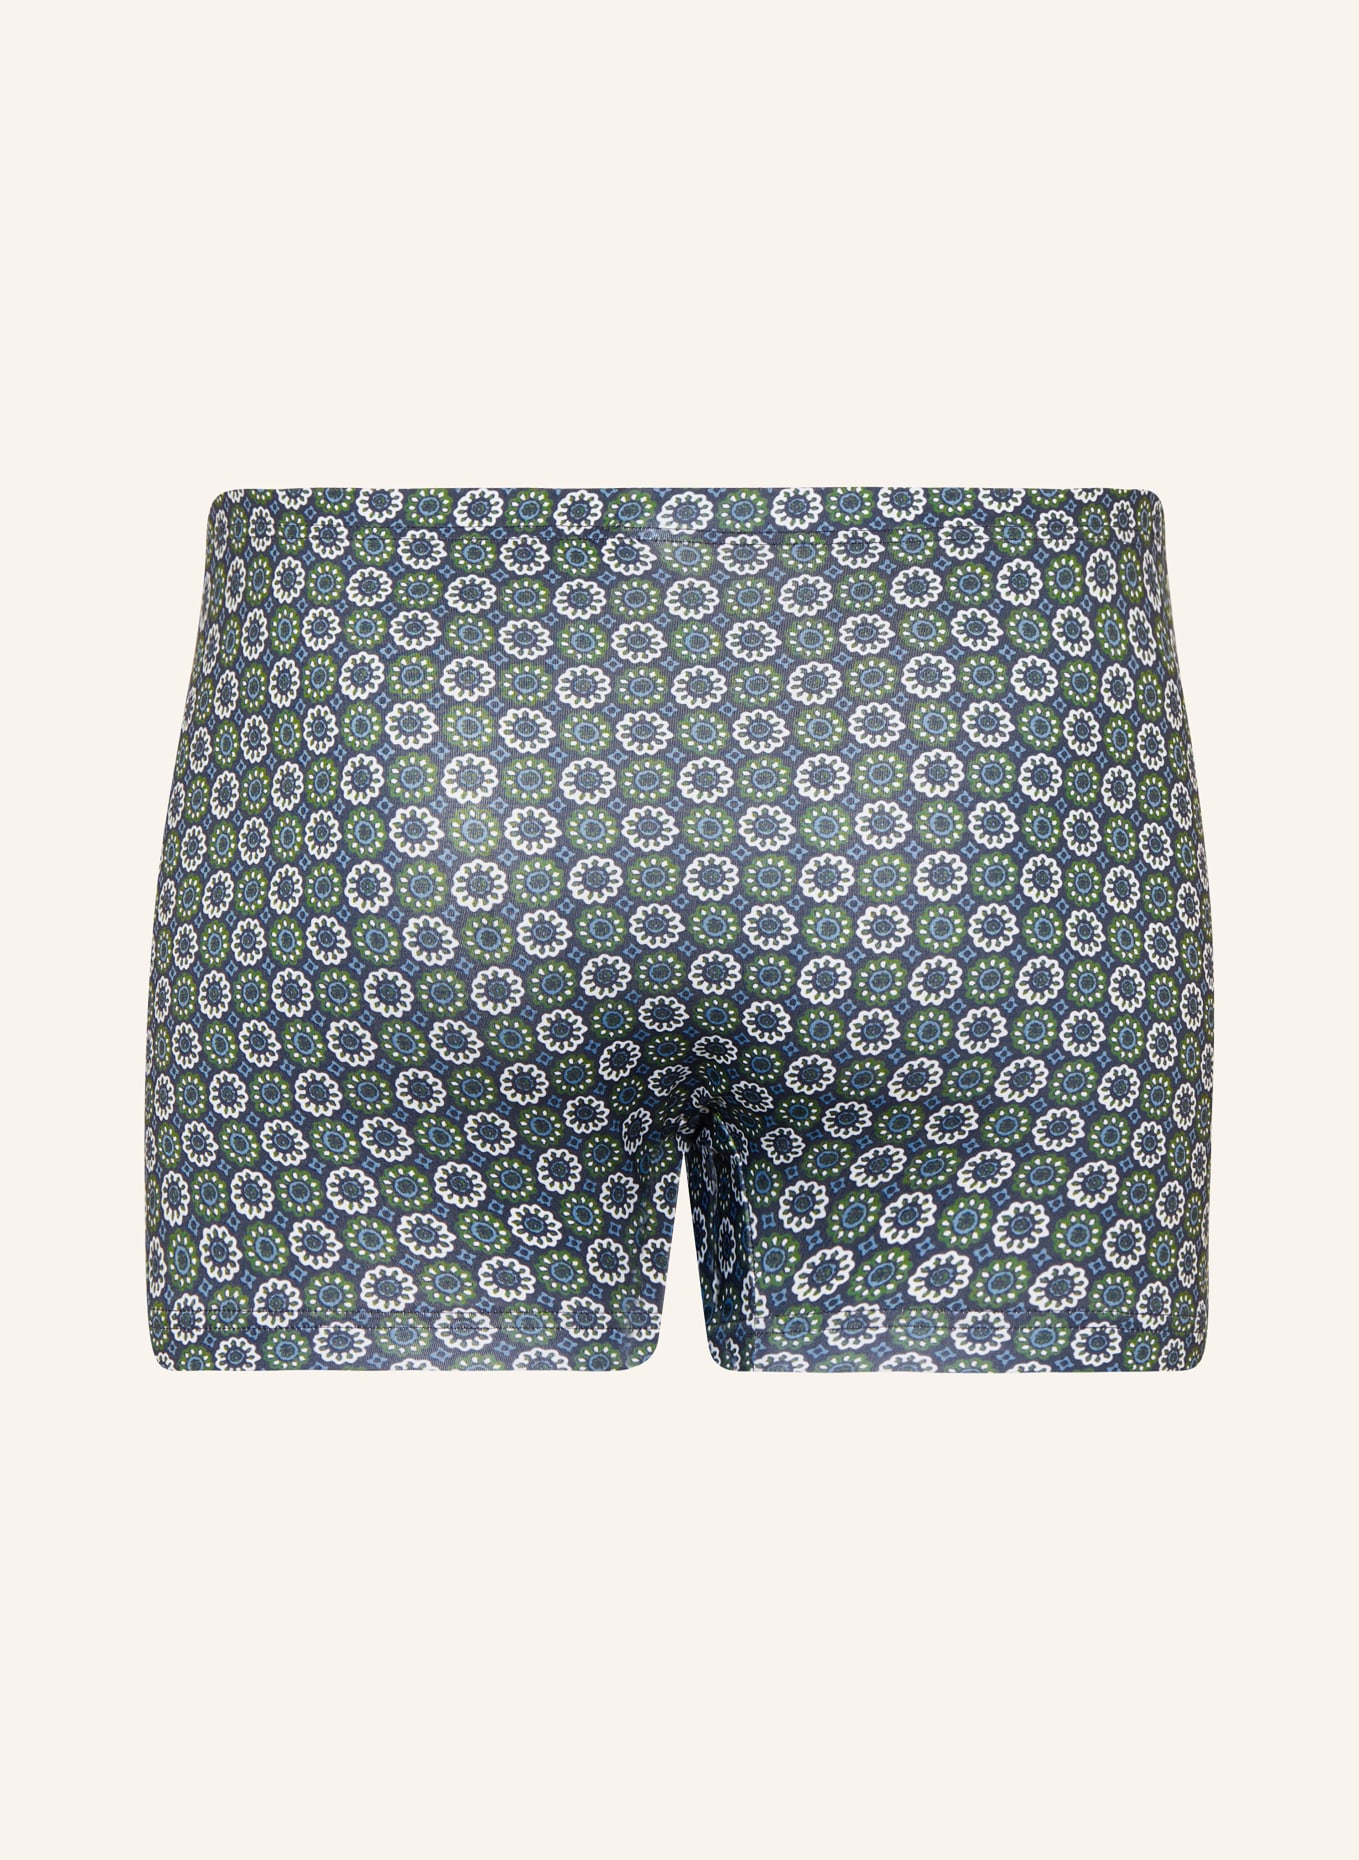 mey Boxer shorts series FLOWERY, Color: DARK BLUE/ OLIVE/ WHITE (Image 2)